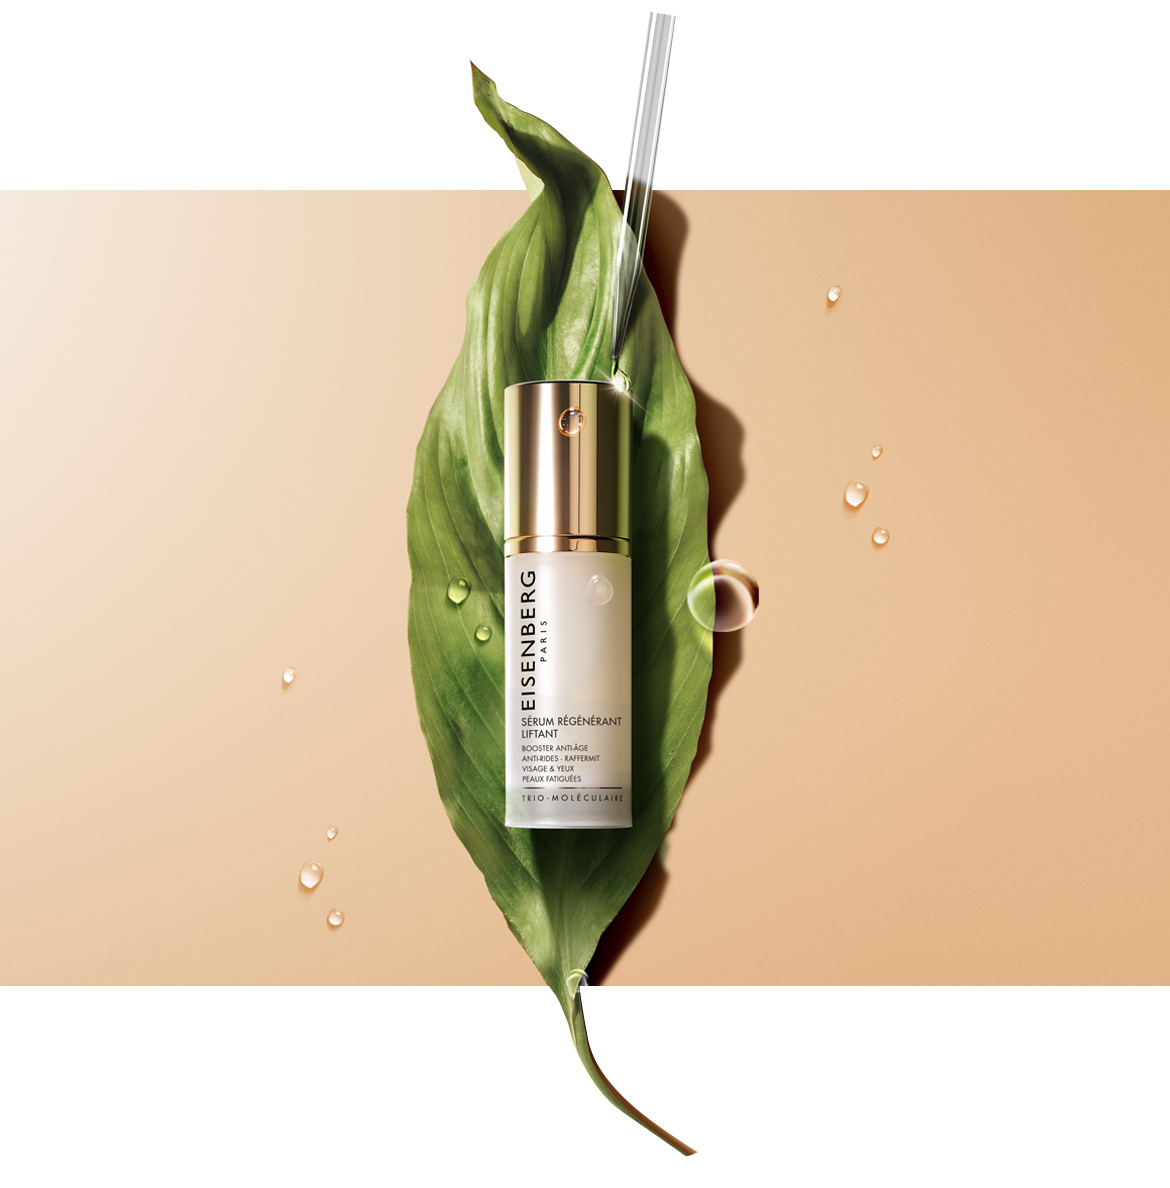 serum for face and a pipette on a green leaf against a peachy background